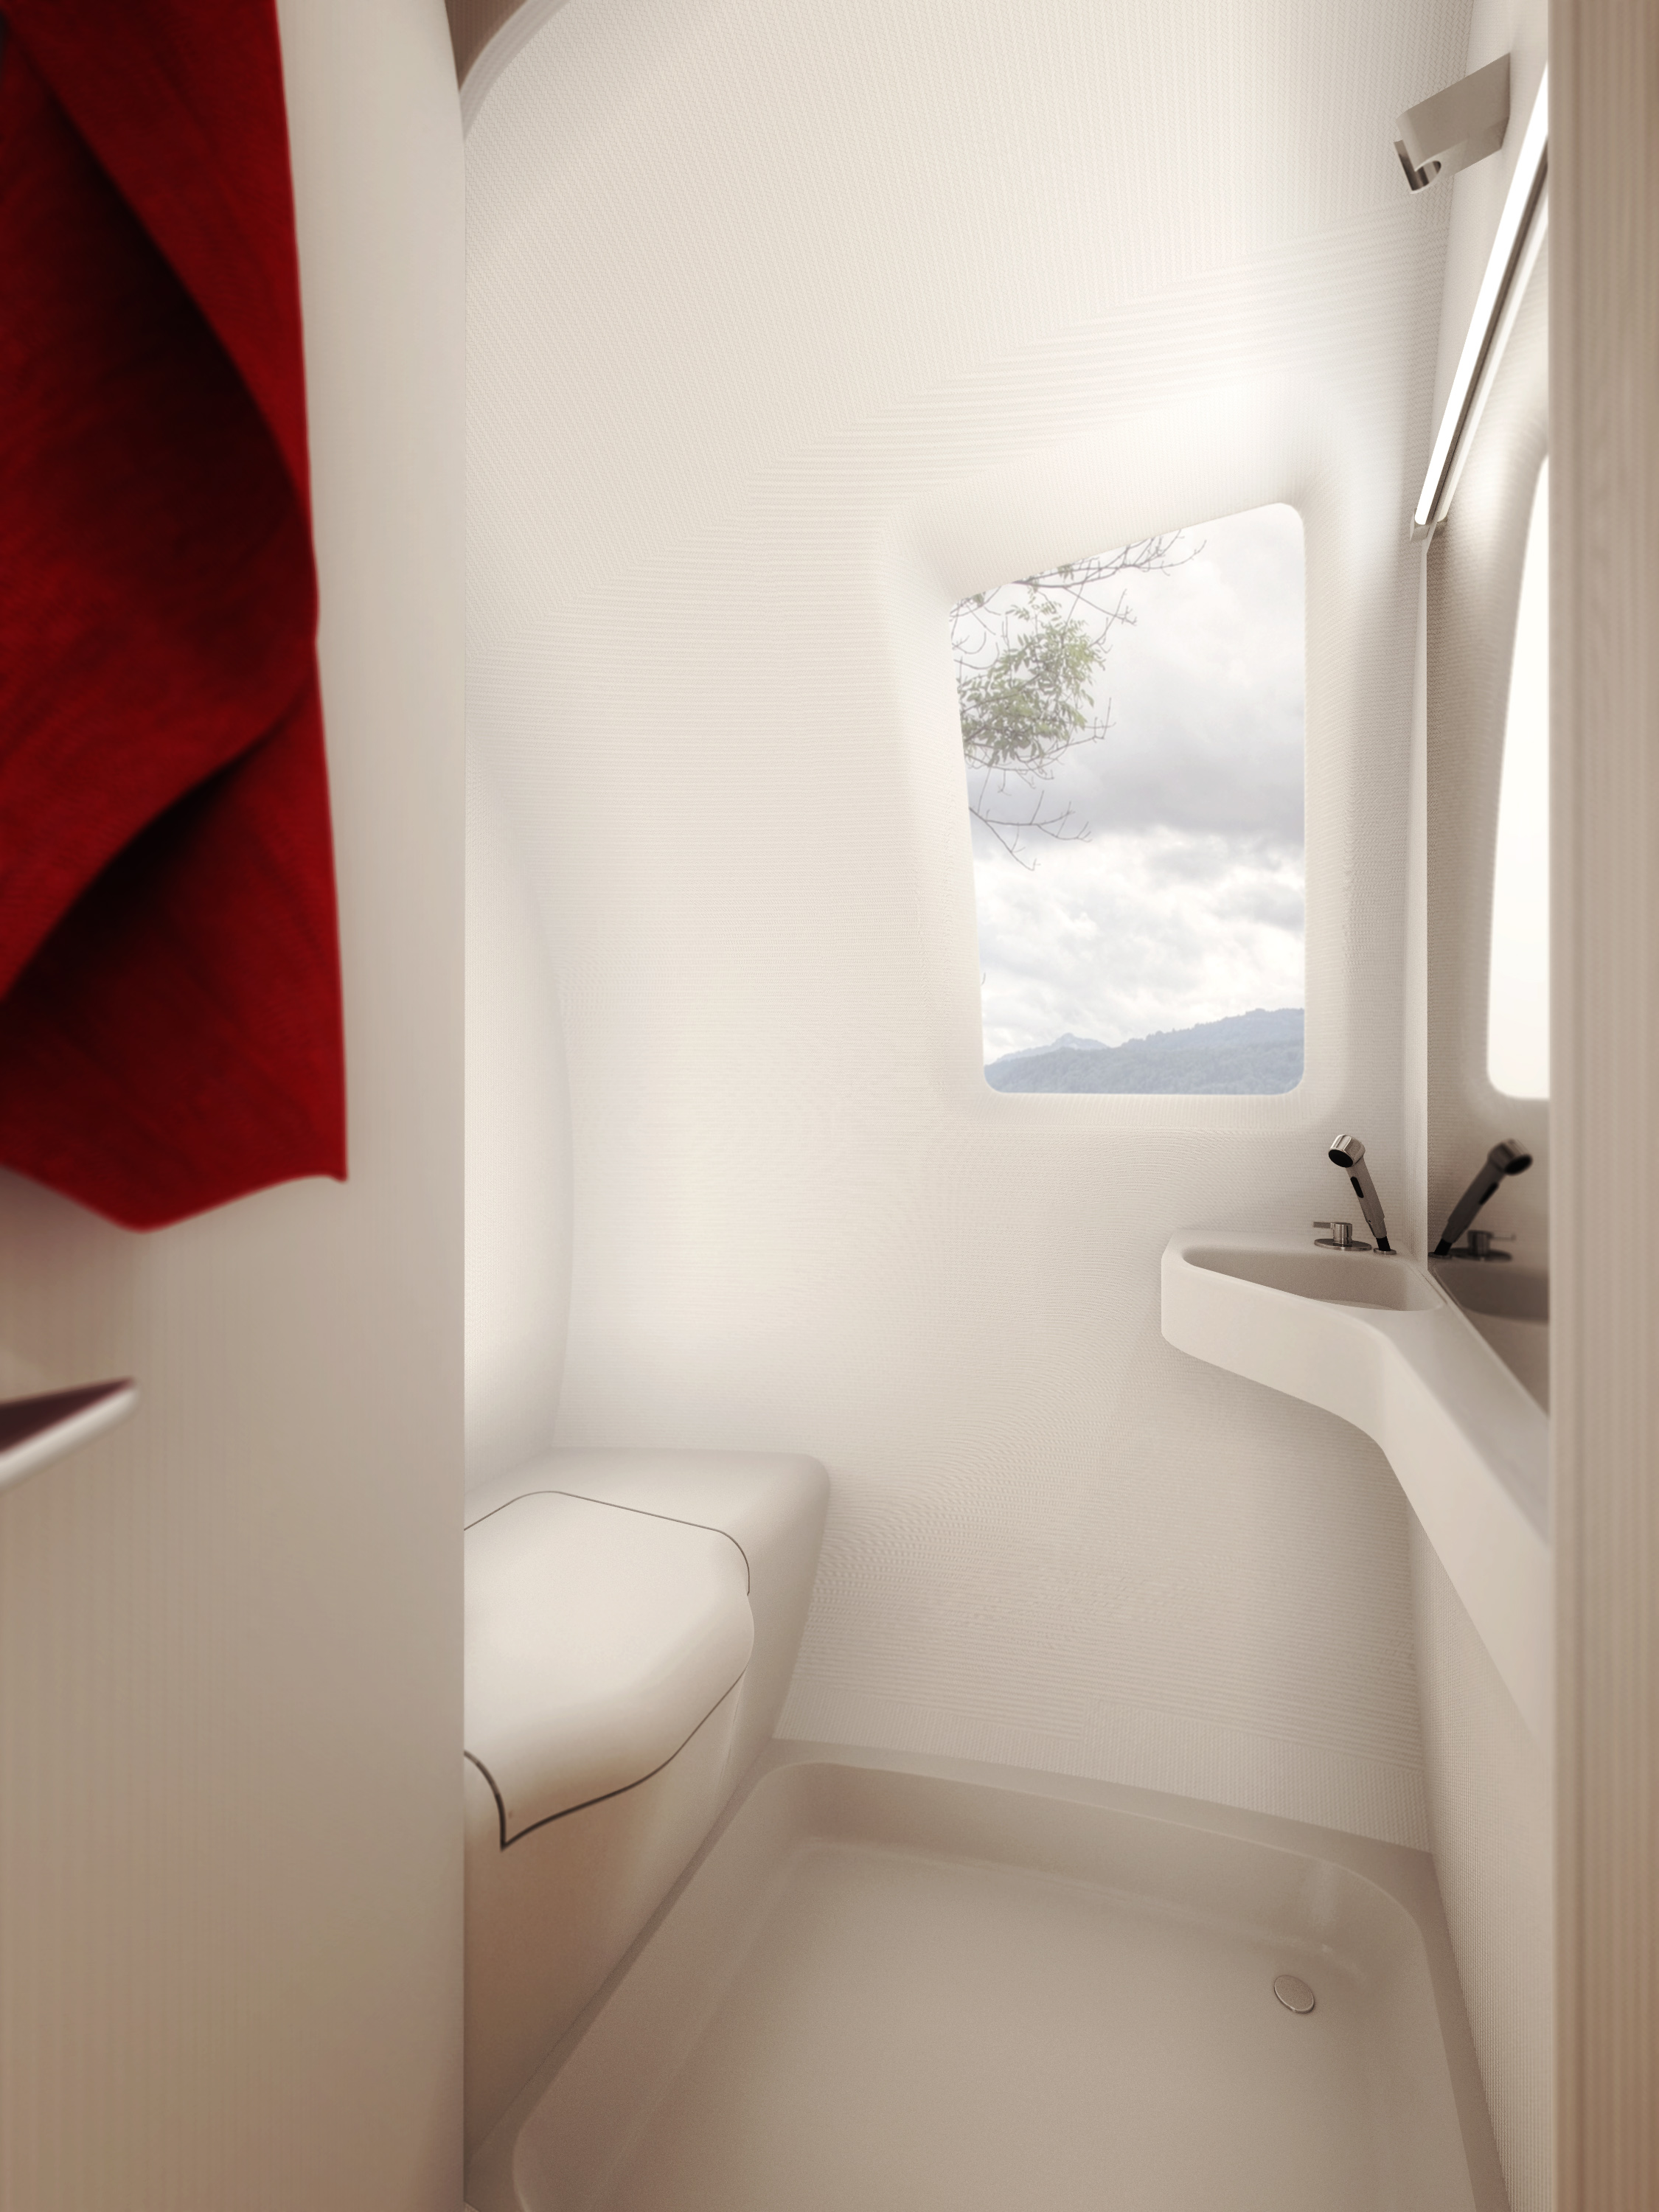 The Ecocapsule's bathroom has a shower, sink, window, mirror, and composting toilet.